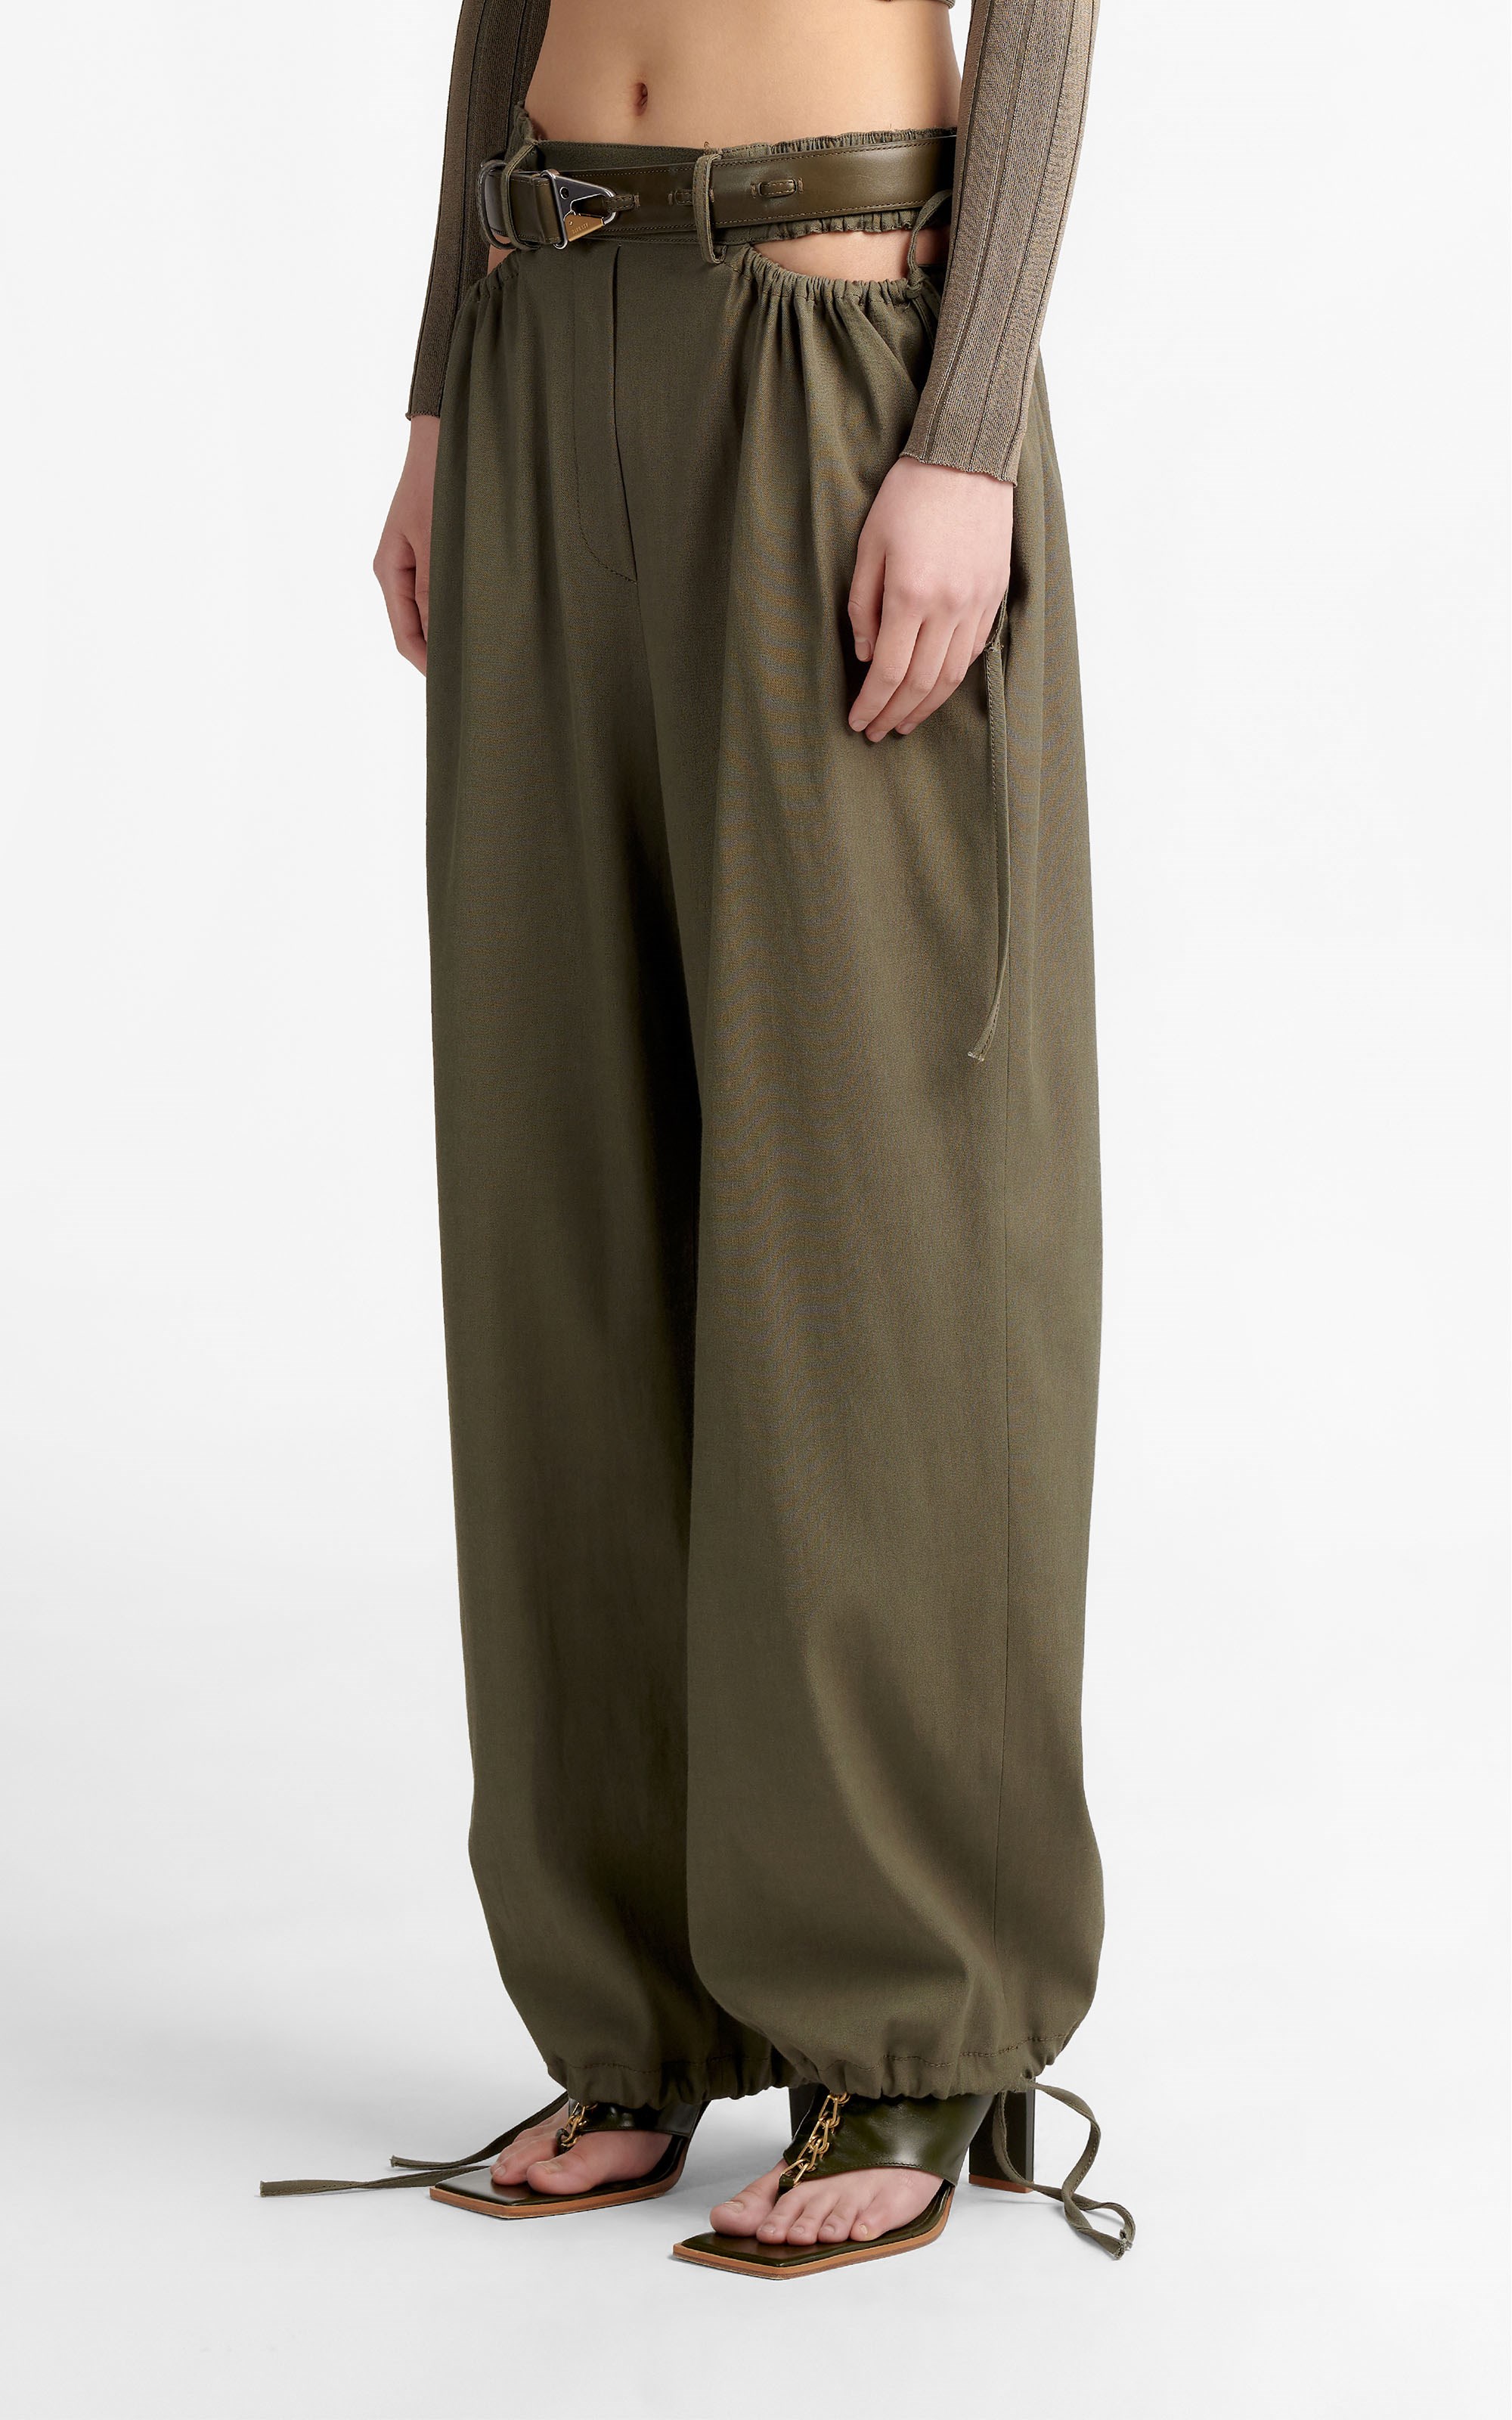 GATHERED TIE PANT by Dion Lee